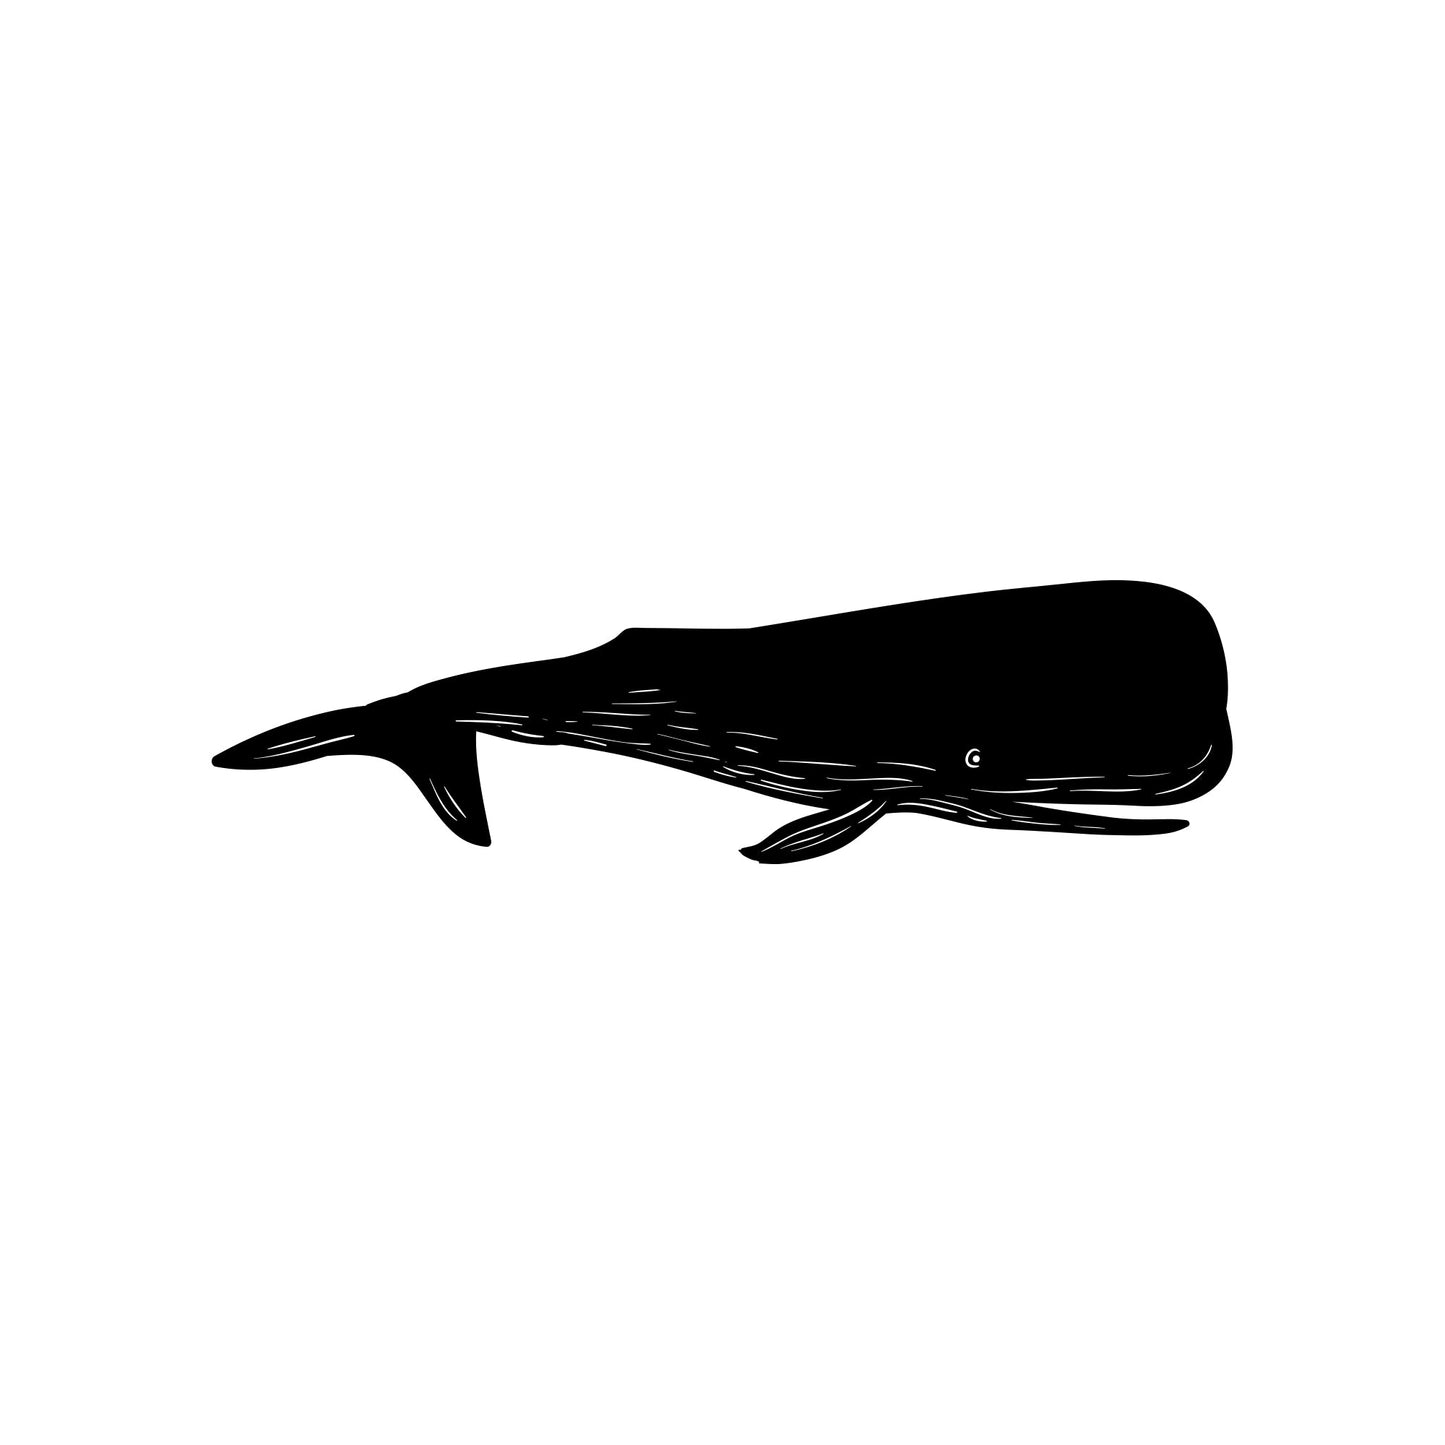 Whale Wall Decal Sticker Art. #OS_MB1102